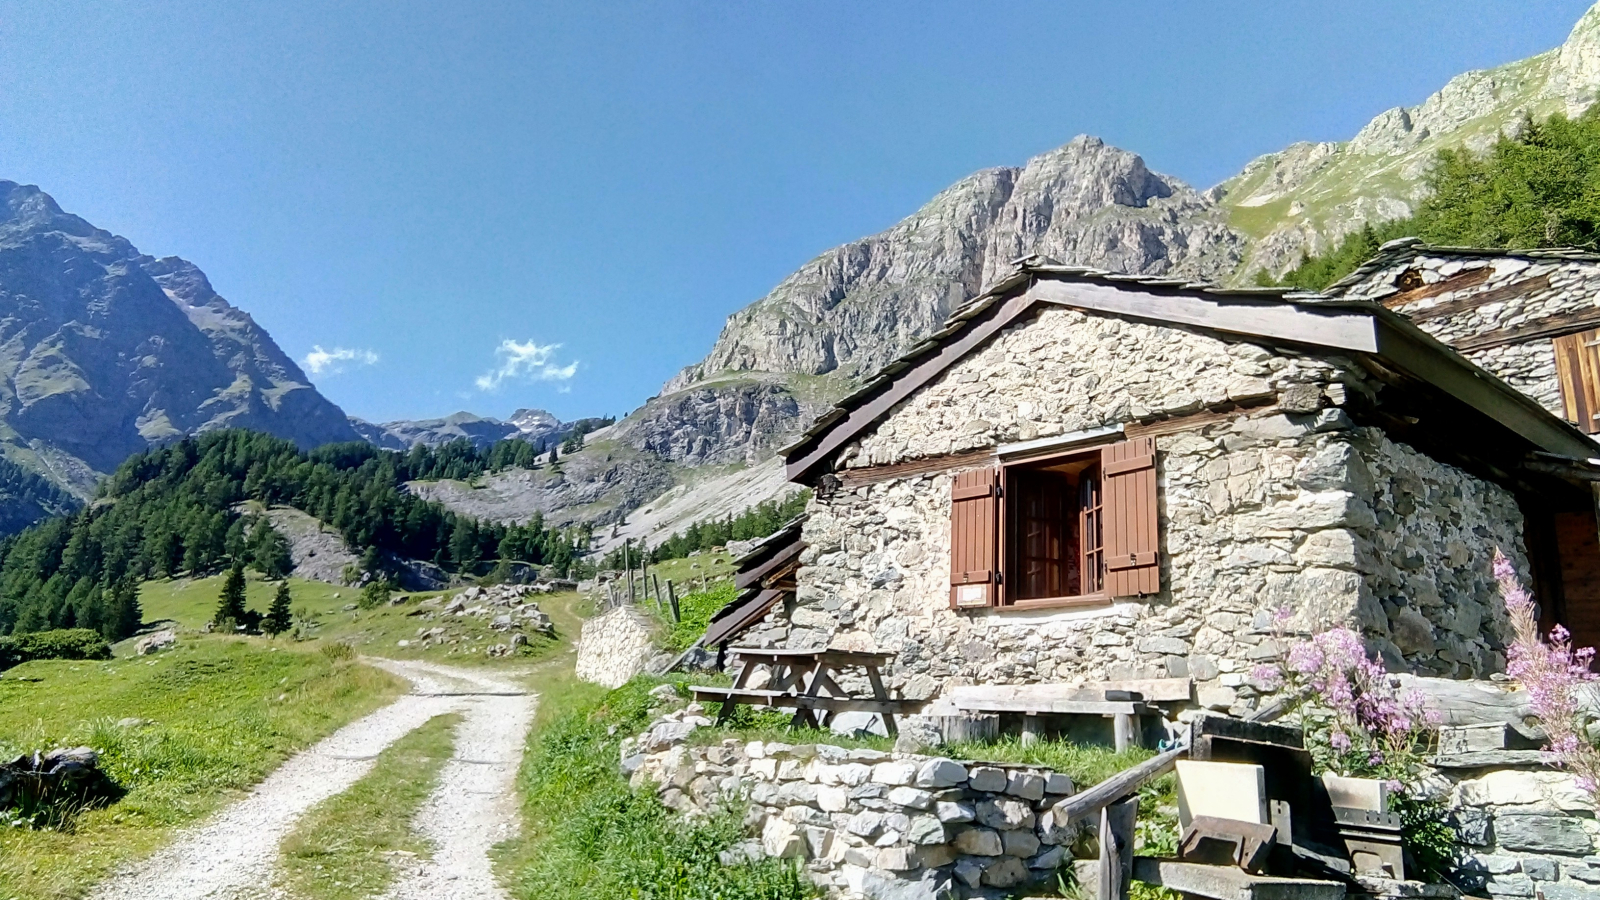 Rental of an alpine chalet in the Polset valley